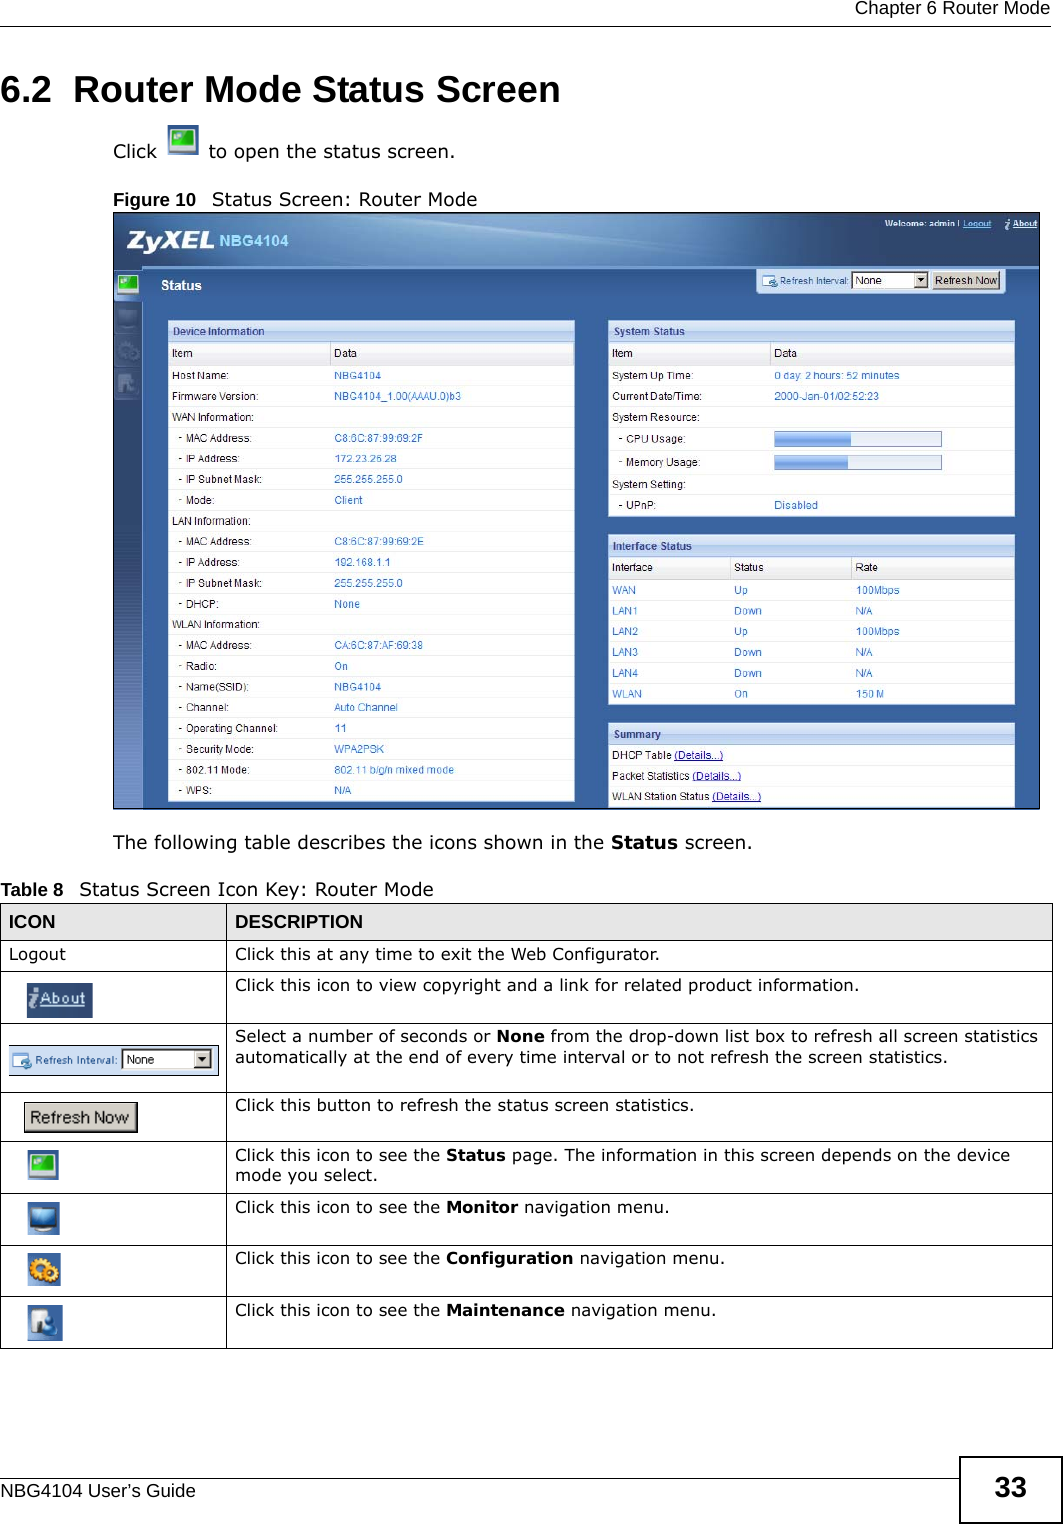  Chapter 6 Router ModeNBG4104 User’s Guide 336.2  Router Mode Status ScreenClick   to open the status screen. Figure 10   Status Screen: Router Mode The following table describes the icons shown in the Status screen.Table 8   Status Screen Icon Key: Router Mode ICON DESCRIPTIONLogout Click this at any time to exit the Web Configurator.Click this icon to view copyright and a link for related product information.Select a number of seconds or None from the drop-down list box to refresh all screen statistics automatically at the end of every time interval or to not refresh the screen statistics.Click this button to refresh the status screen statistics.Click this icon to see the Status page. The information in this screen depends on the device mode you select. Click this icon to see the Monitor navigation menu. Click this icon to see the Configuration navigation menu. Click this icon to see the Maintenance navigation menu. 